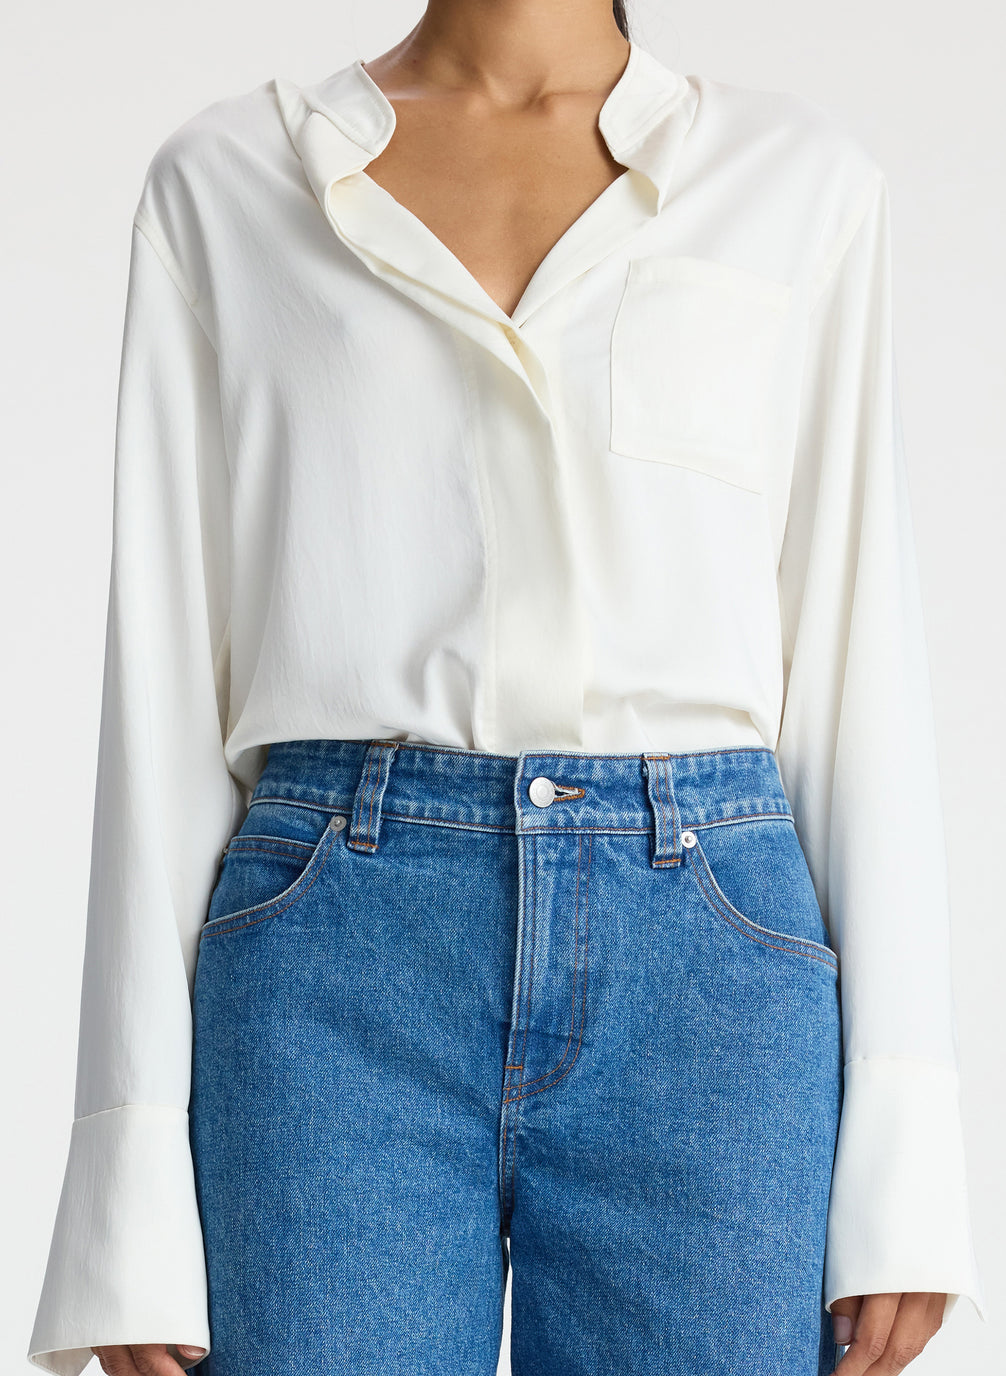 detail view of woman wearing white satin long sleeve button down and medium blue wash denim jeans